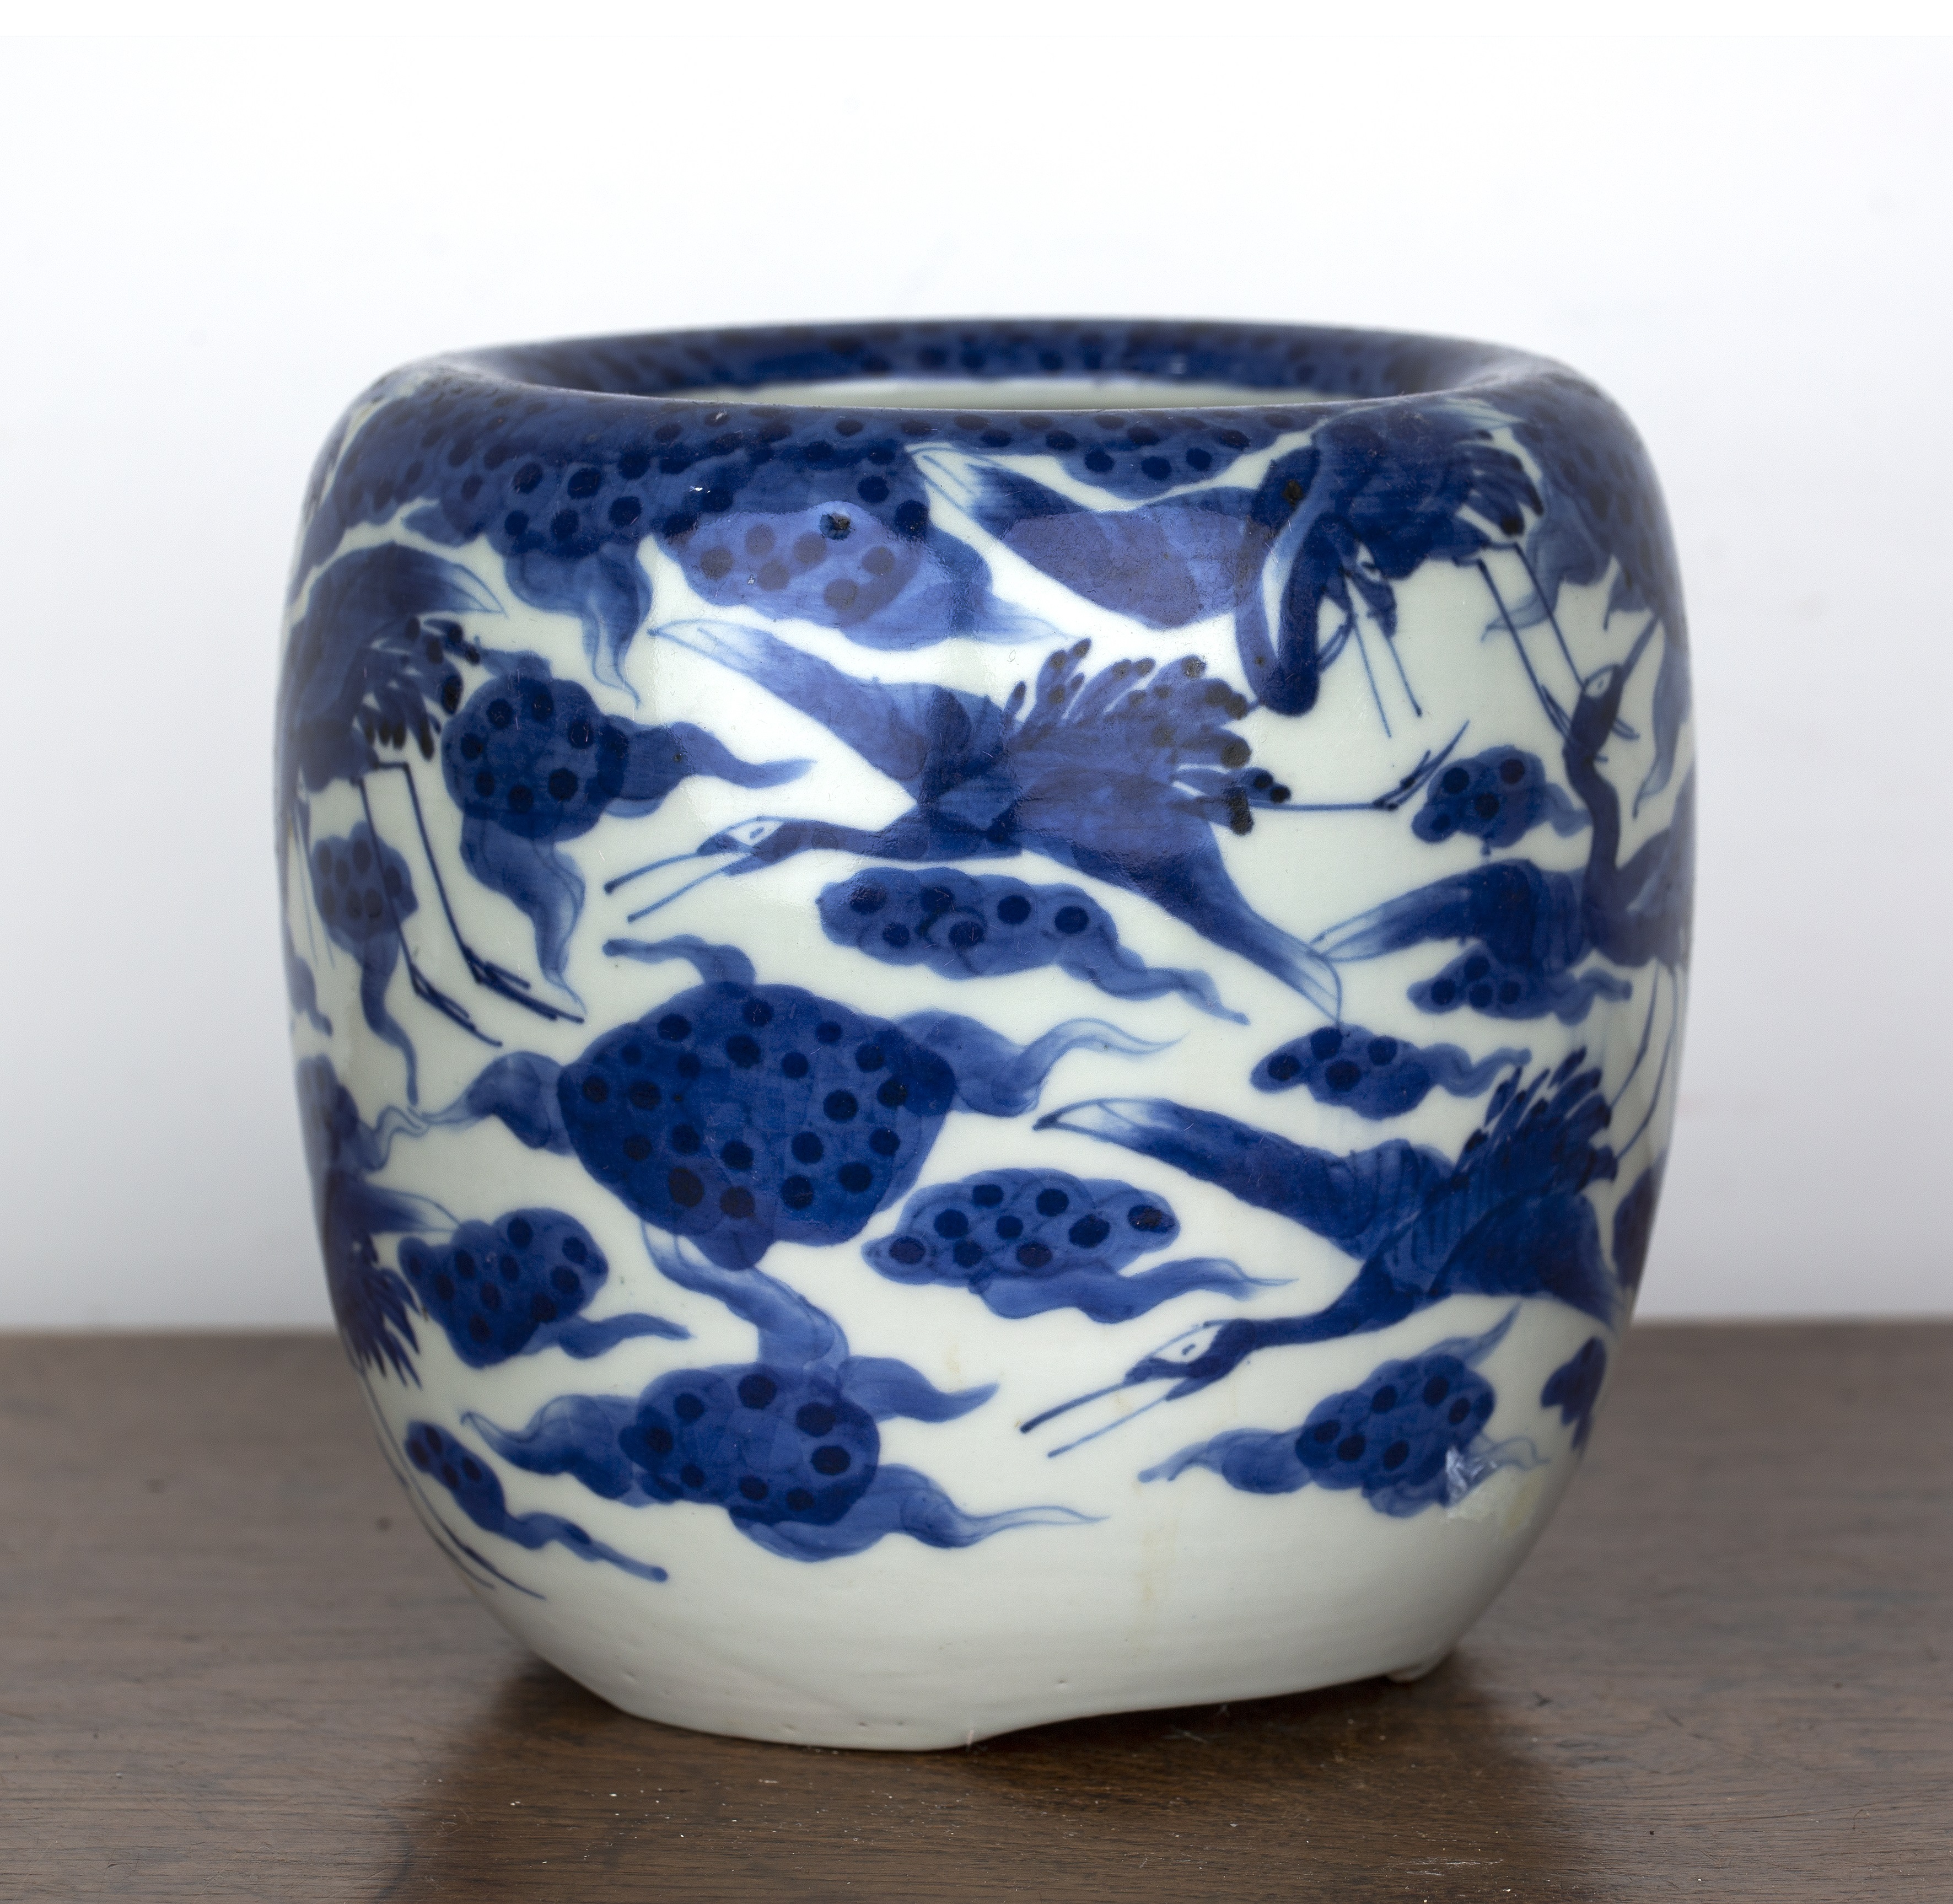 Blue and white porcelain jar Japanese painted with cranes in flight, 16.5cm high x 16.5cm diameter - Image 3 of 4